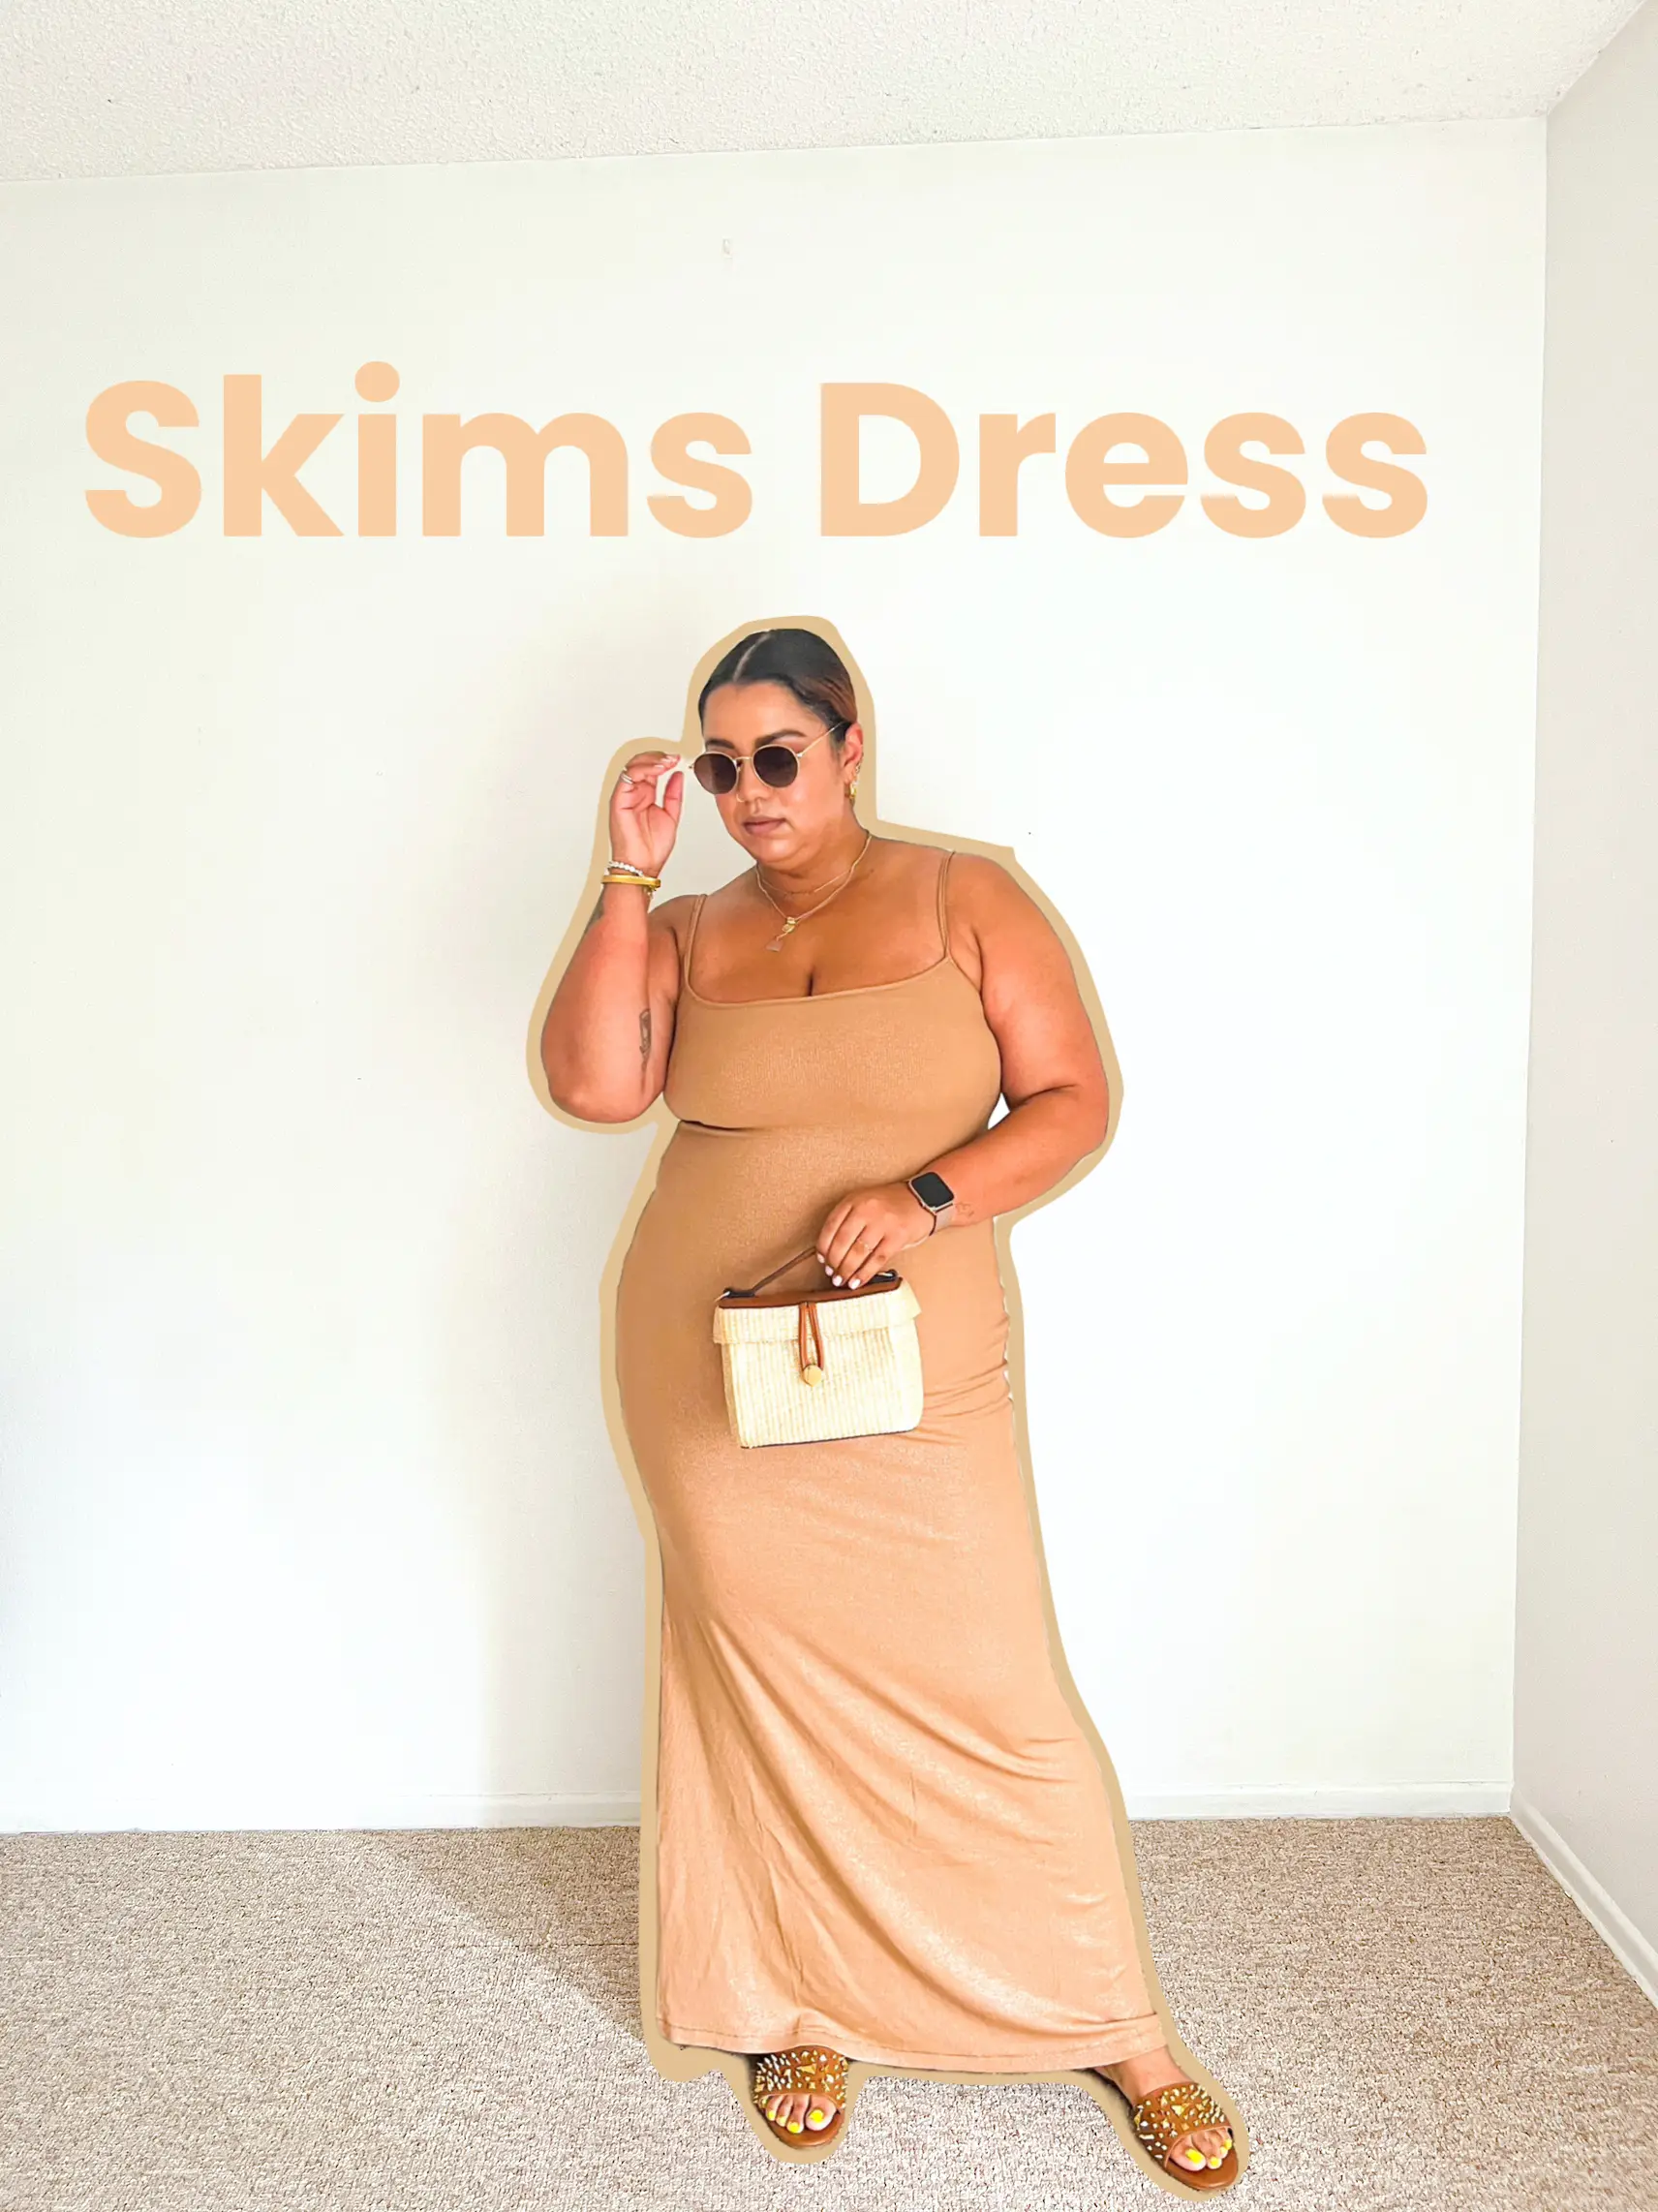 Skims dress on a size 16, Gallery posted by Flora